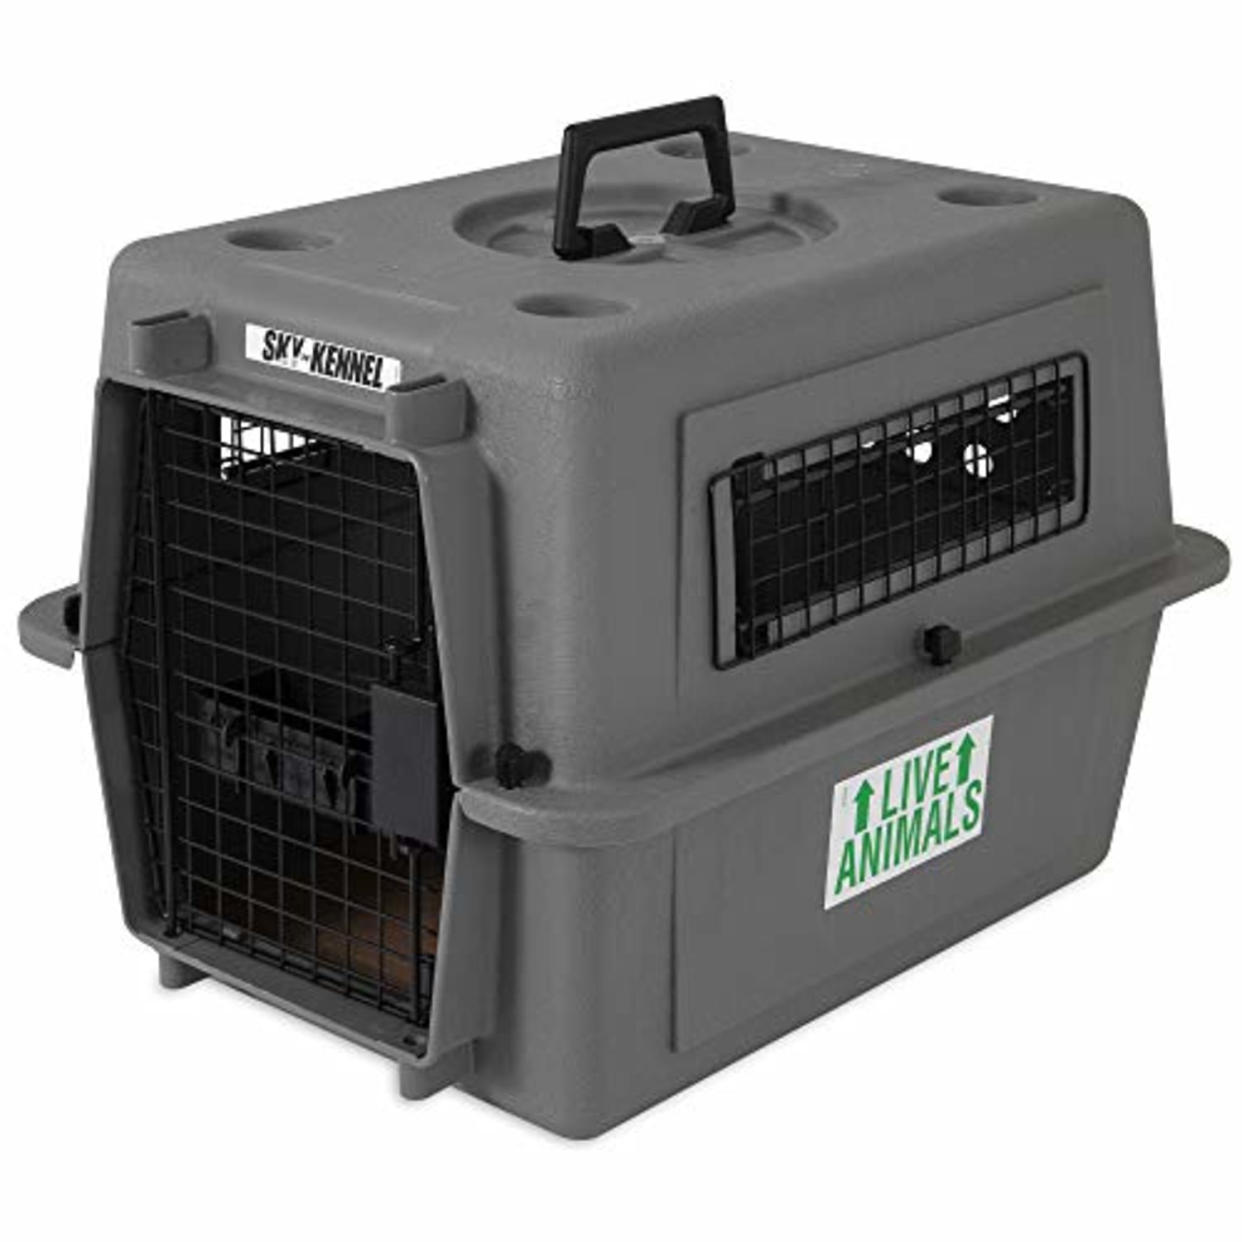 Petmate Sky Kennel Pet Small Carrier. Best dog crates in 2021. ('Multiple' Murder Victims Found in Calif. Home / 'Multiple' Murder Victims Found in Calif. Home)